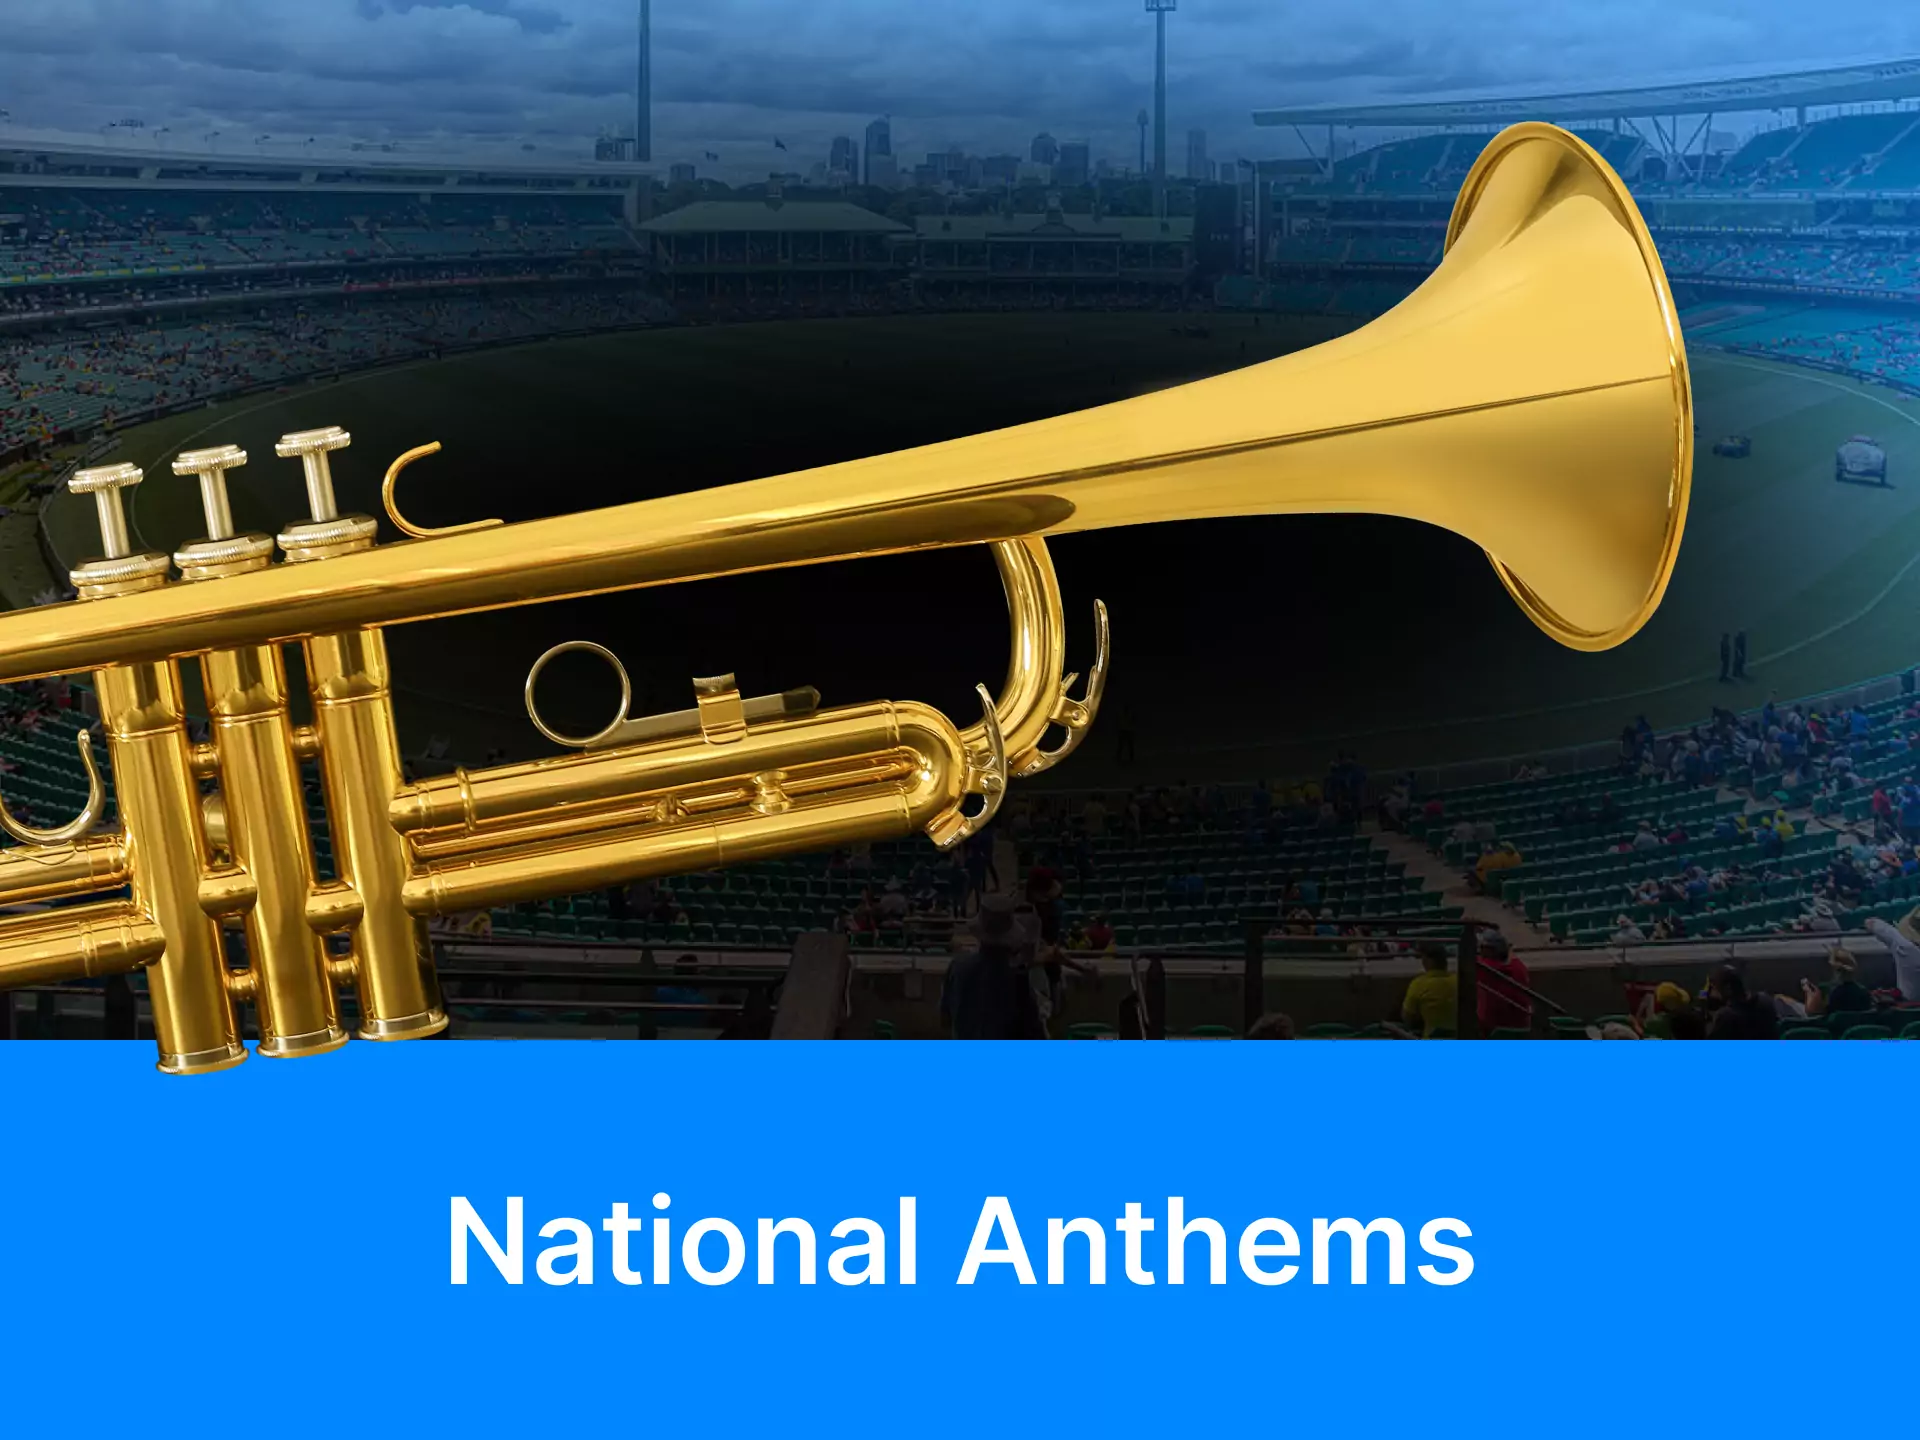 Find out why national anthems are so important when playing matches.